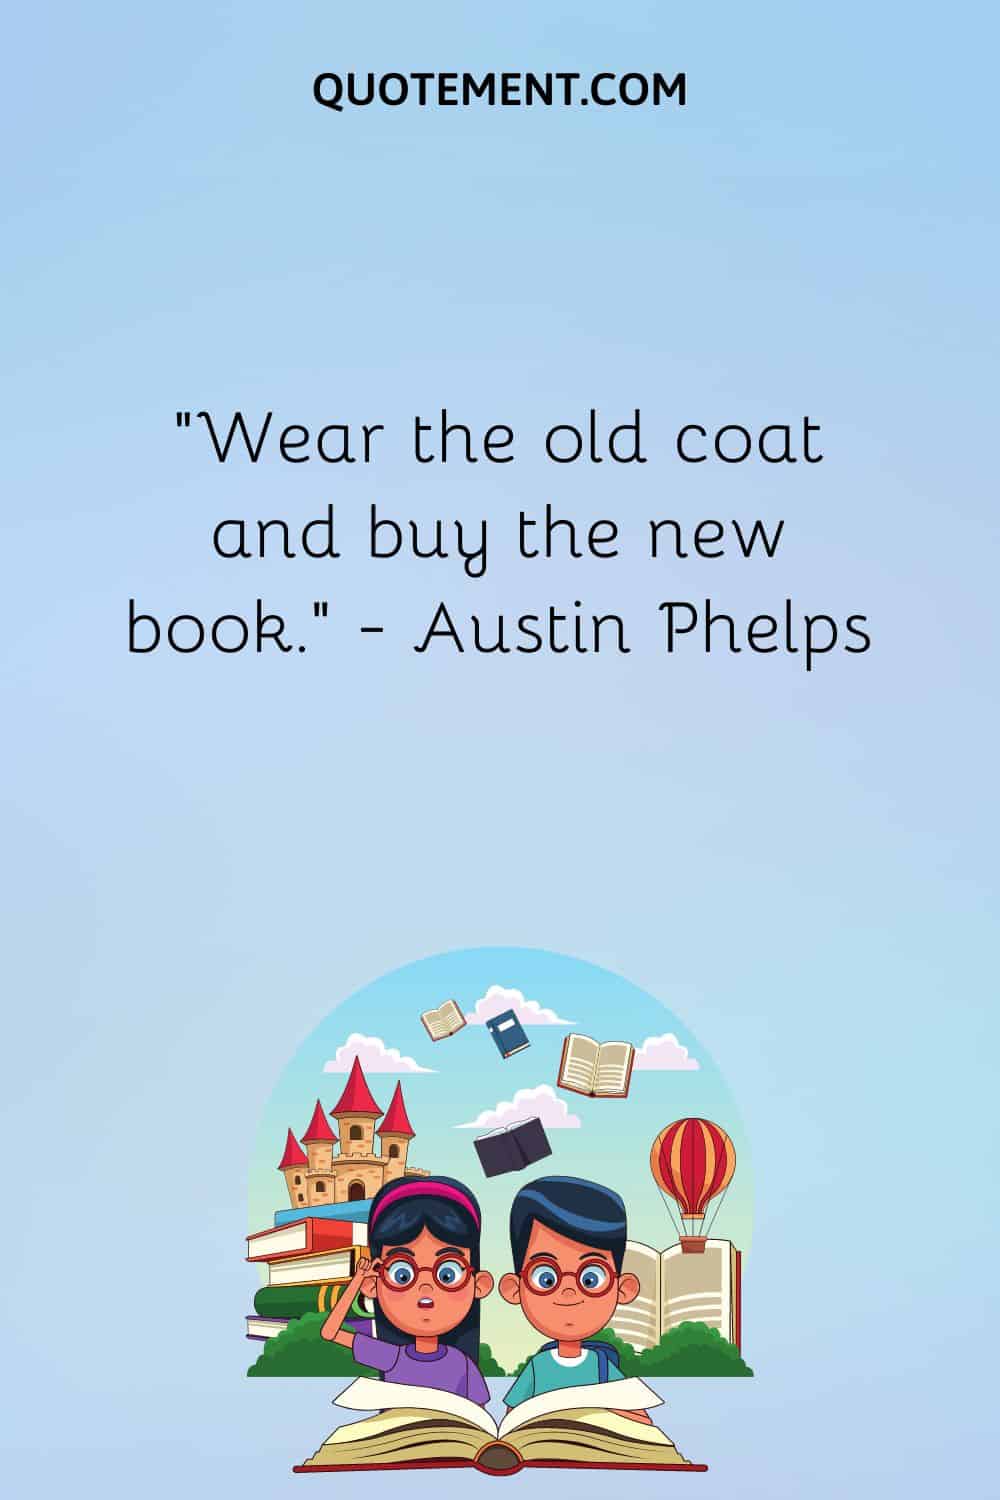 “Wear the old coat and buy the new book.” — Austin Phelps